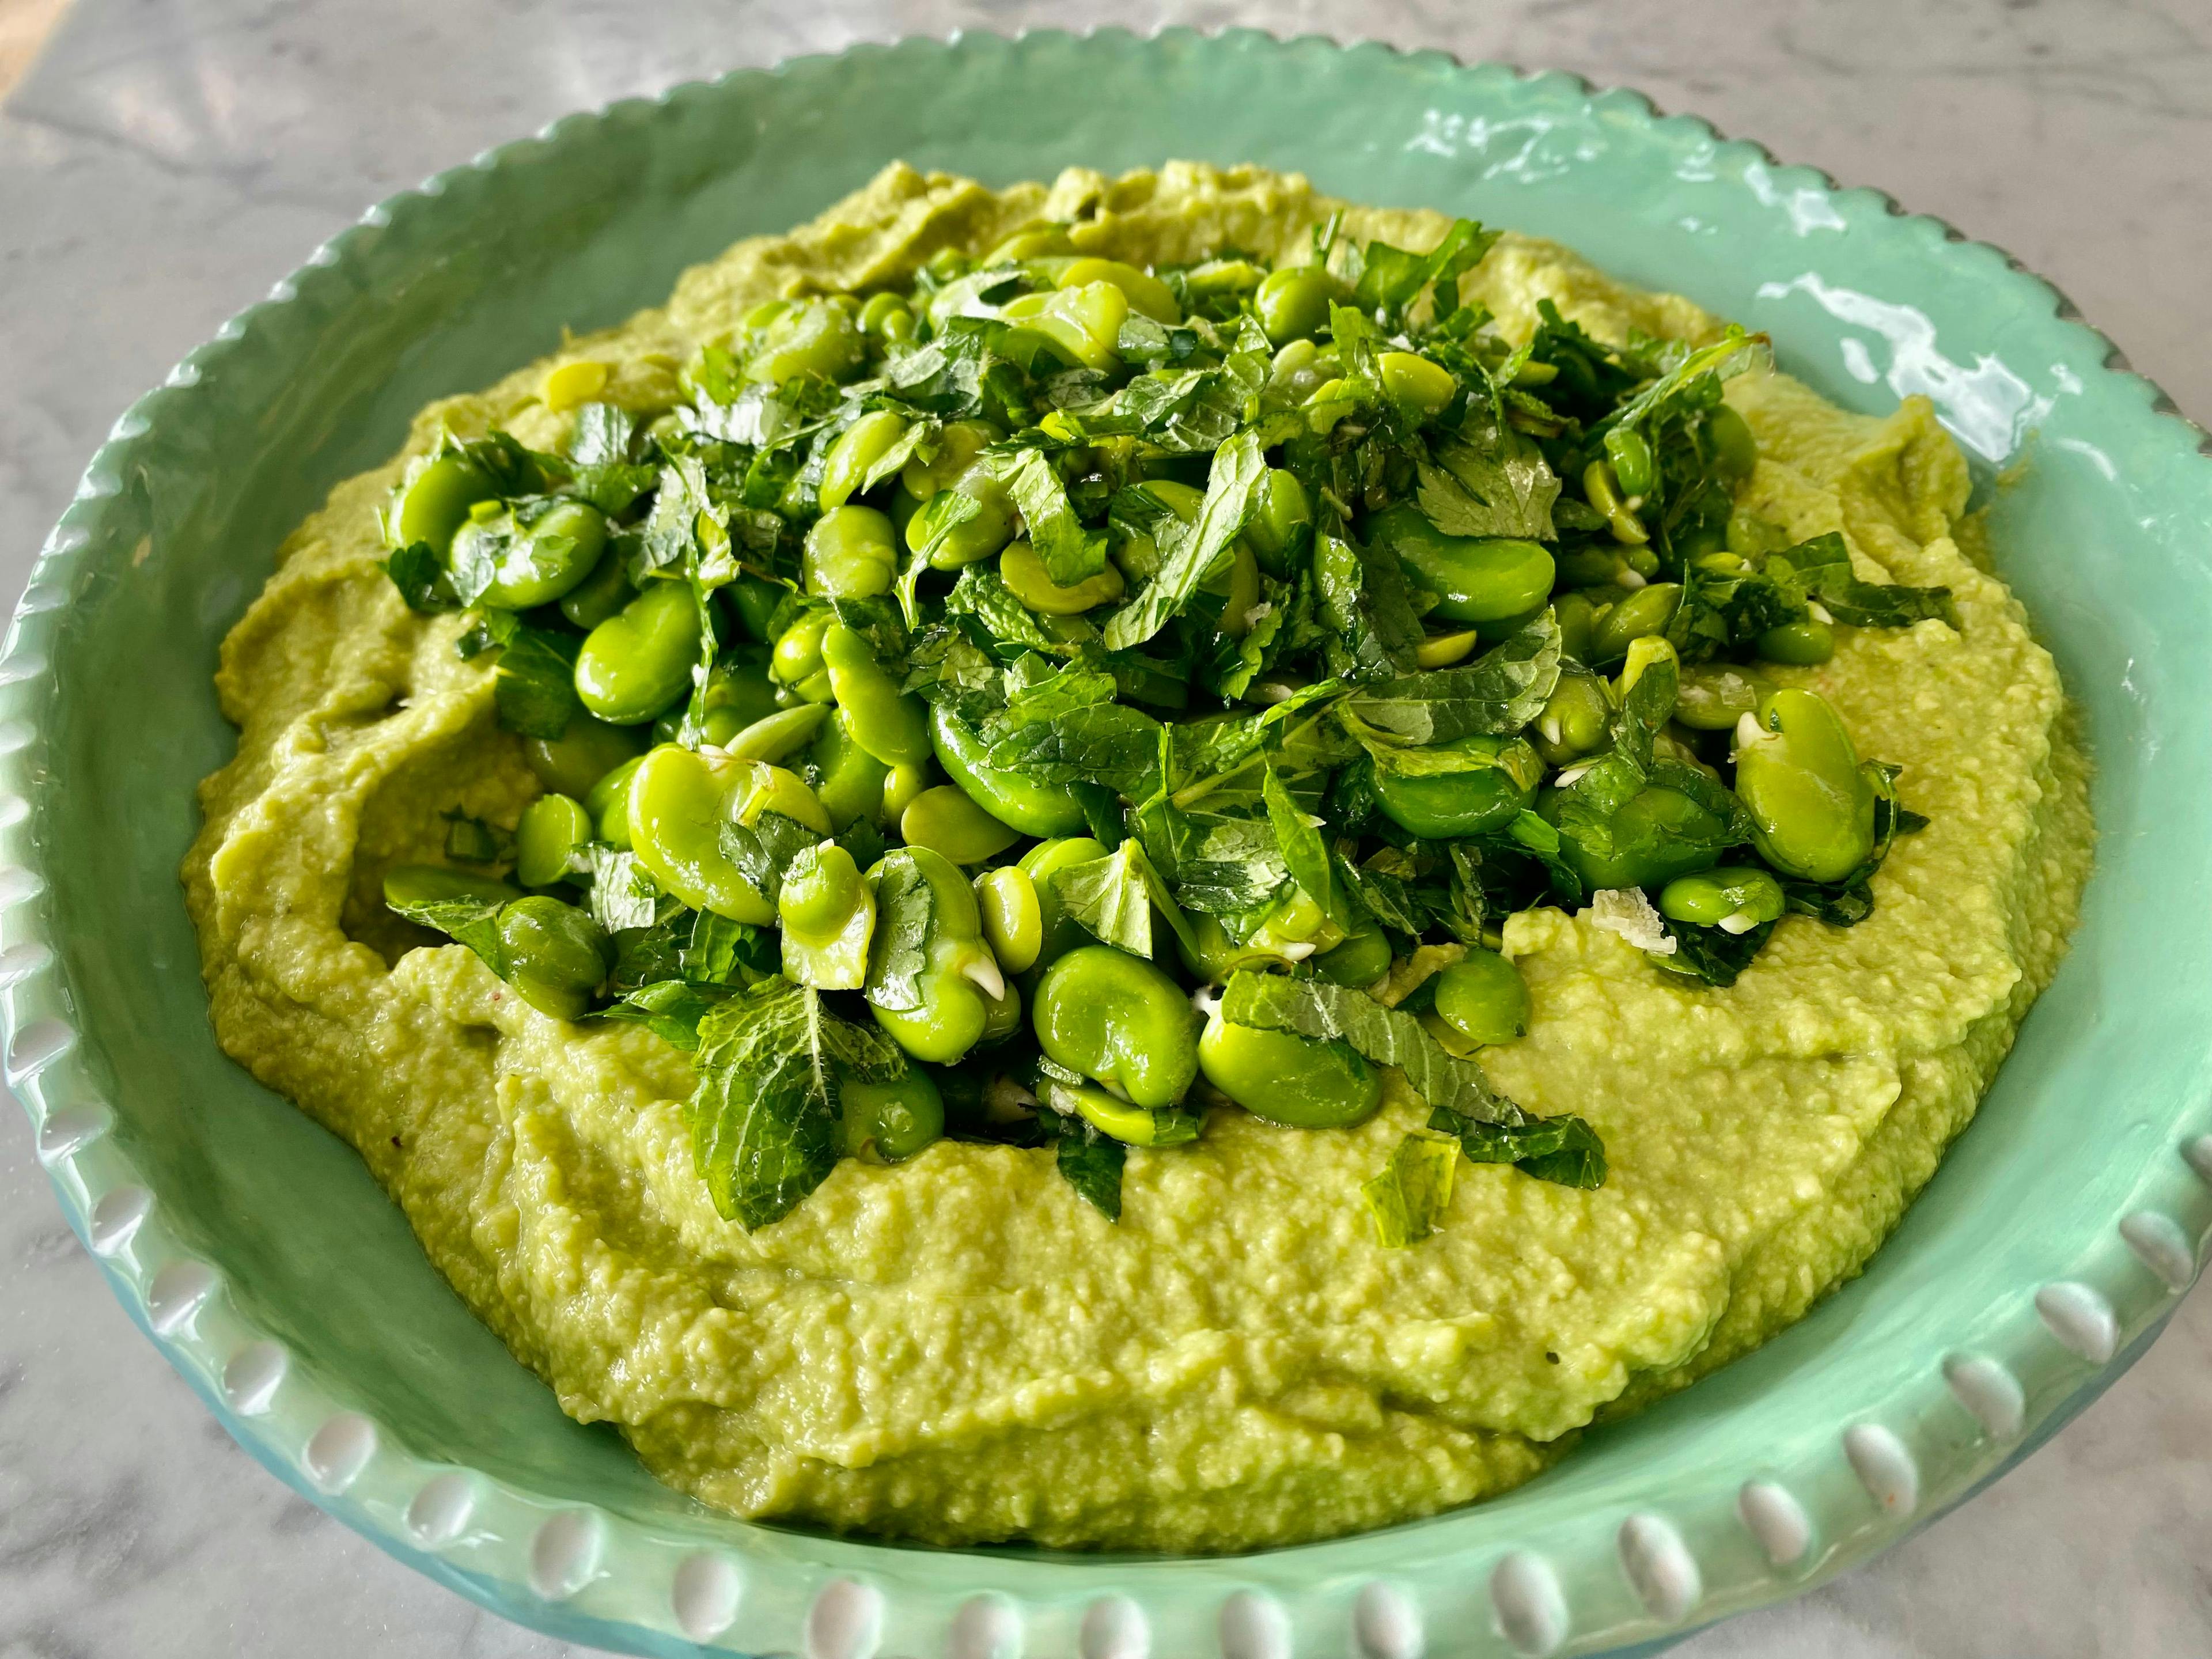 mashed avocados on a serving plate with broad beans on top